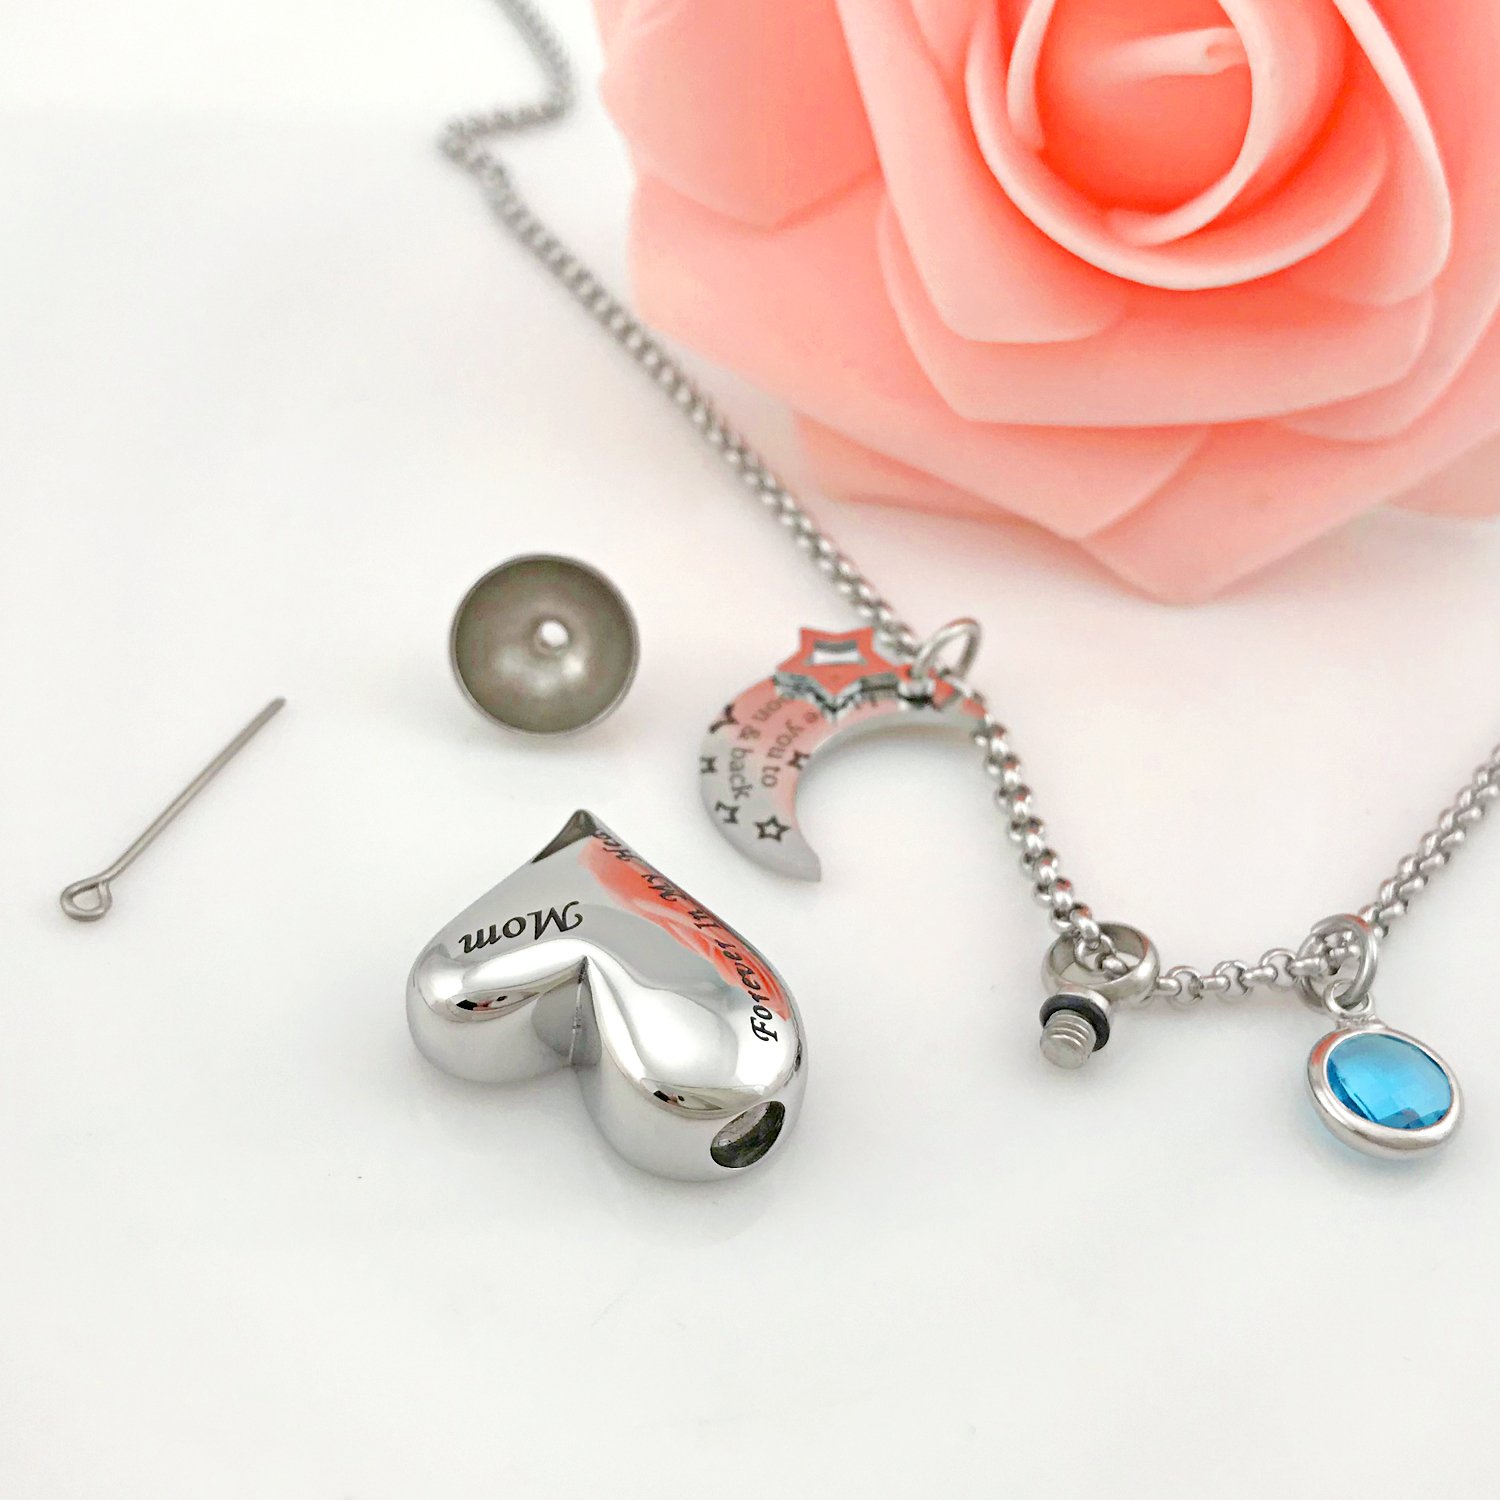 YOUFENG Urn Necklaces for Ashes I Love You to the Moon and Back for Mom Cremation Urn Locket Birthstone Jewelry